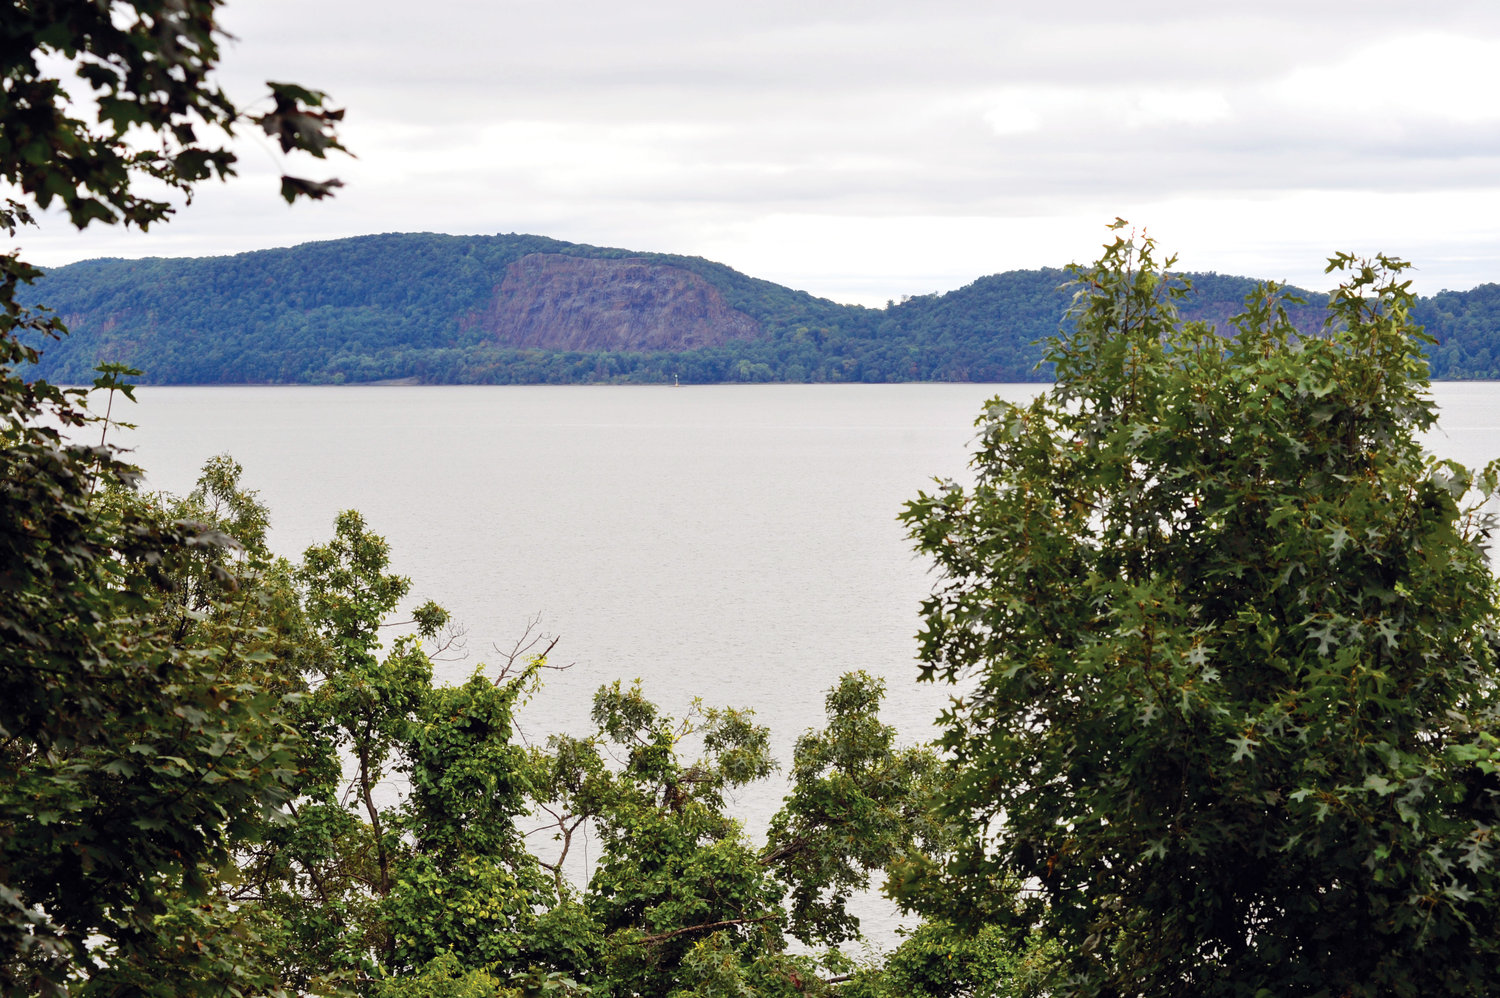 A view beyond the trees at Mariandale shows the Hudson River and the landscape of Rockland County.